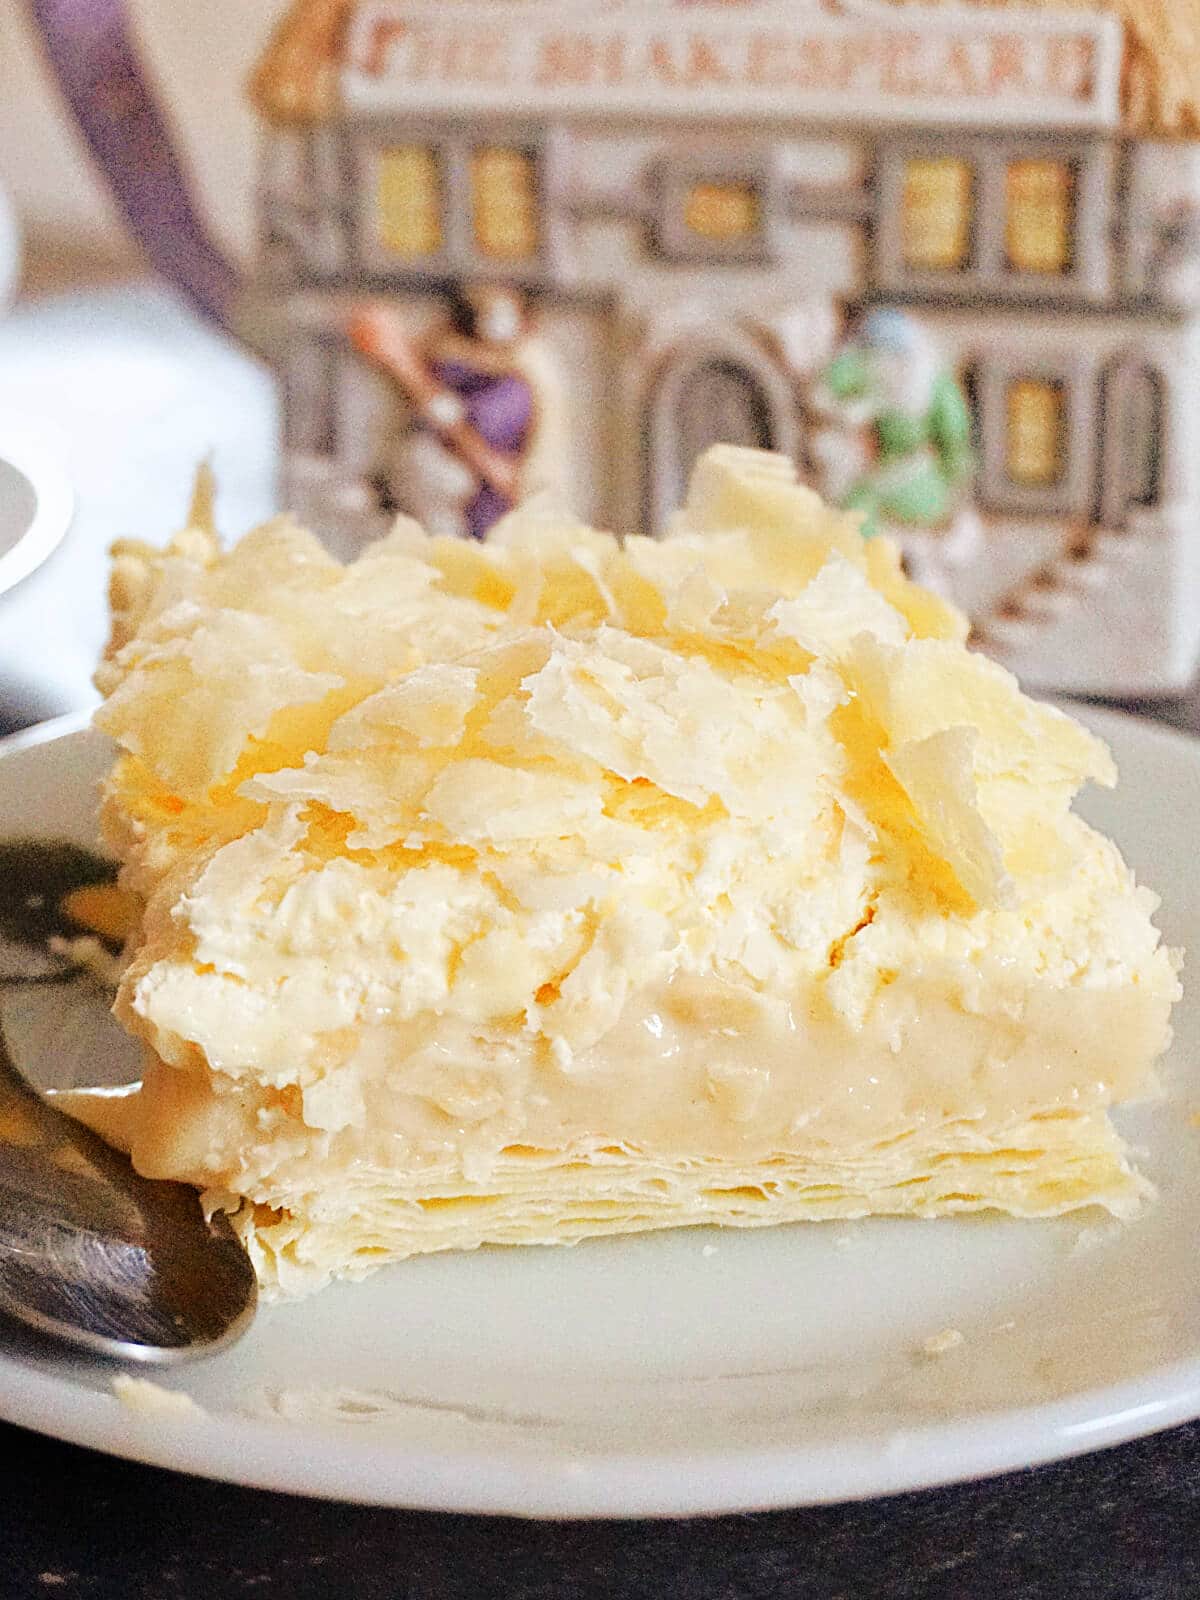 A slice of cremeschnitte on a white plate.